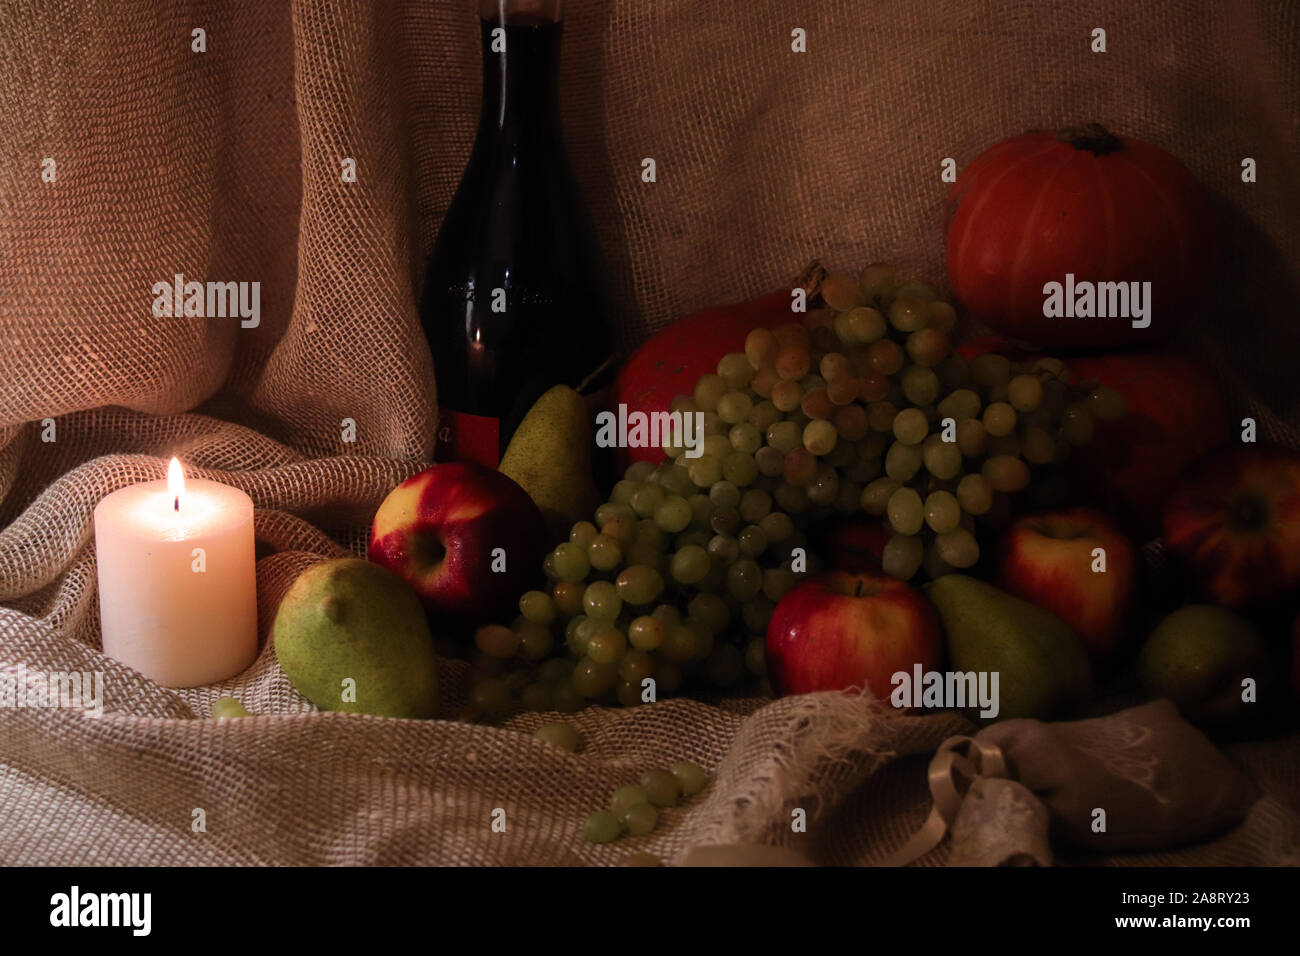 Autumn harvest still life. Apples, pears, grapes and pumpkin on sackcloth backgound with bottle of wine and candle light Stock Photo